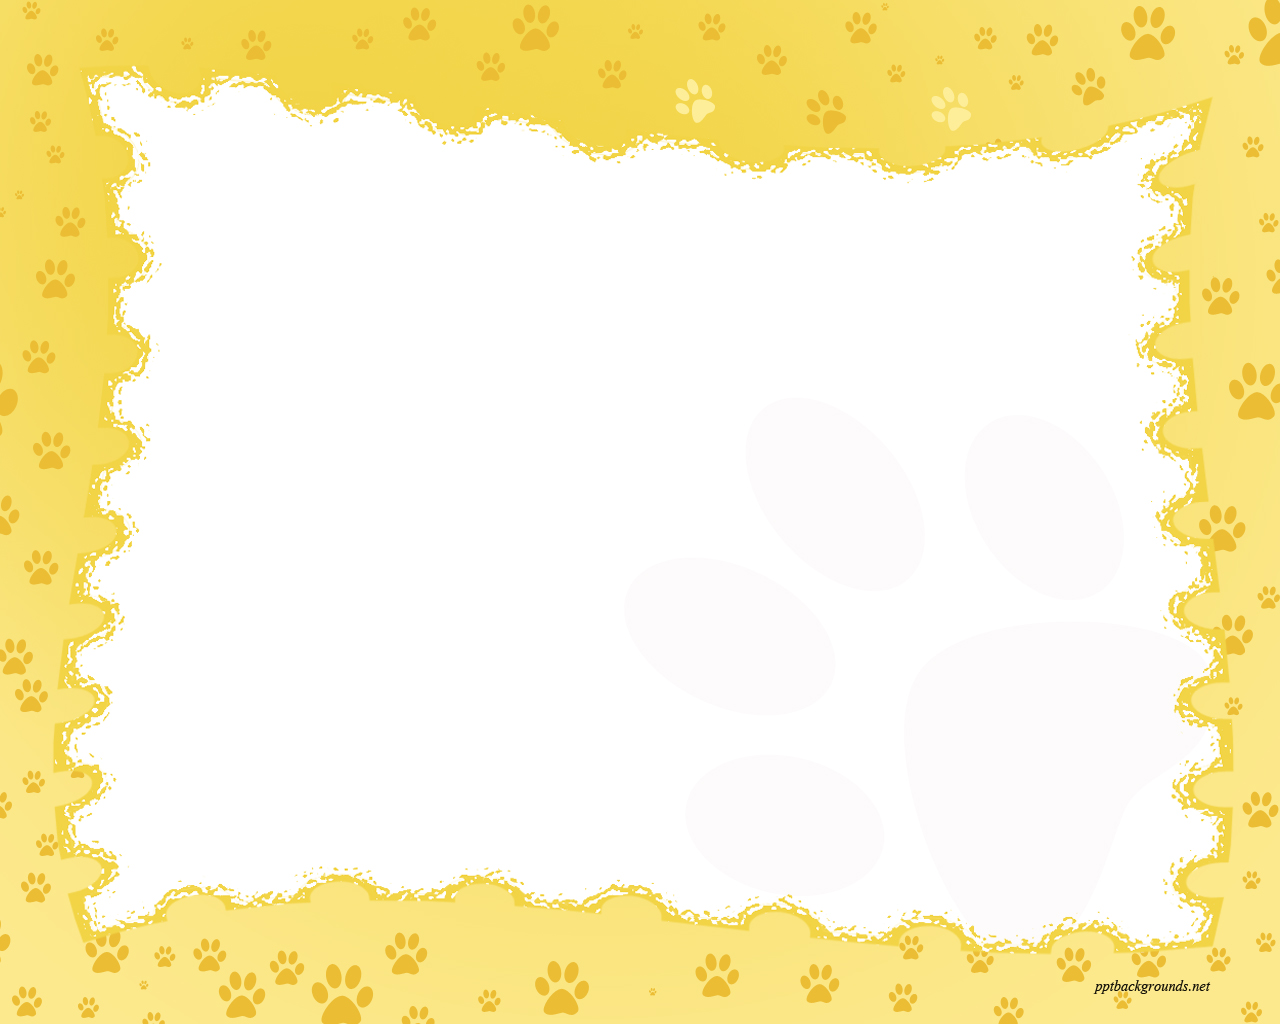 Paw Prints Border Background For Powerpoint And Frame